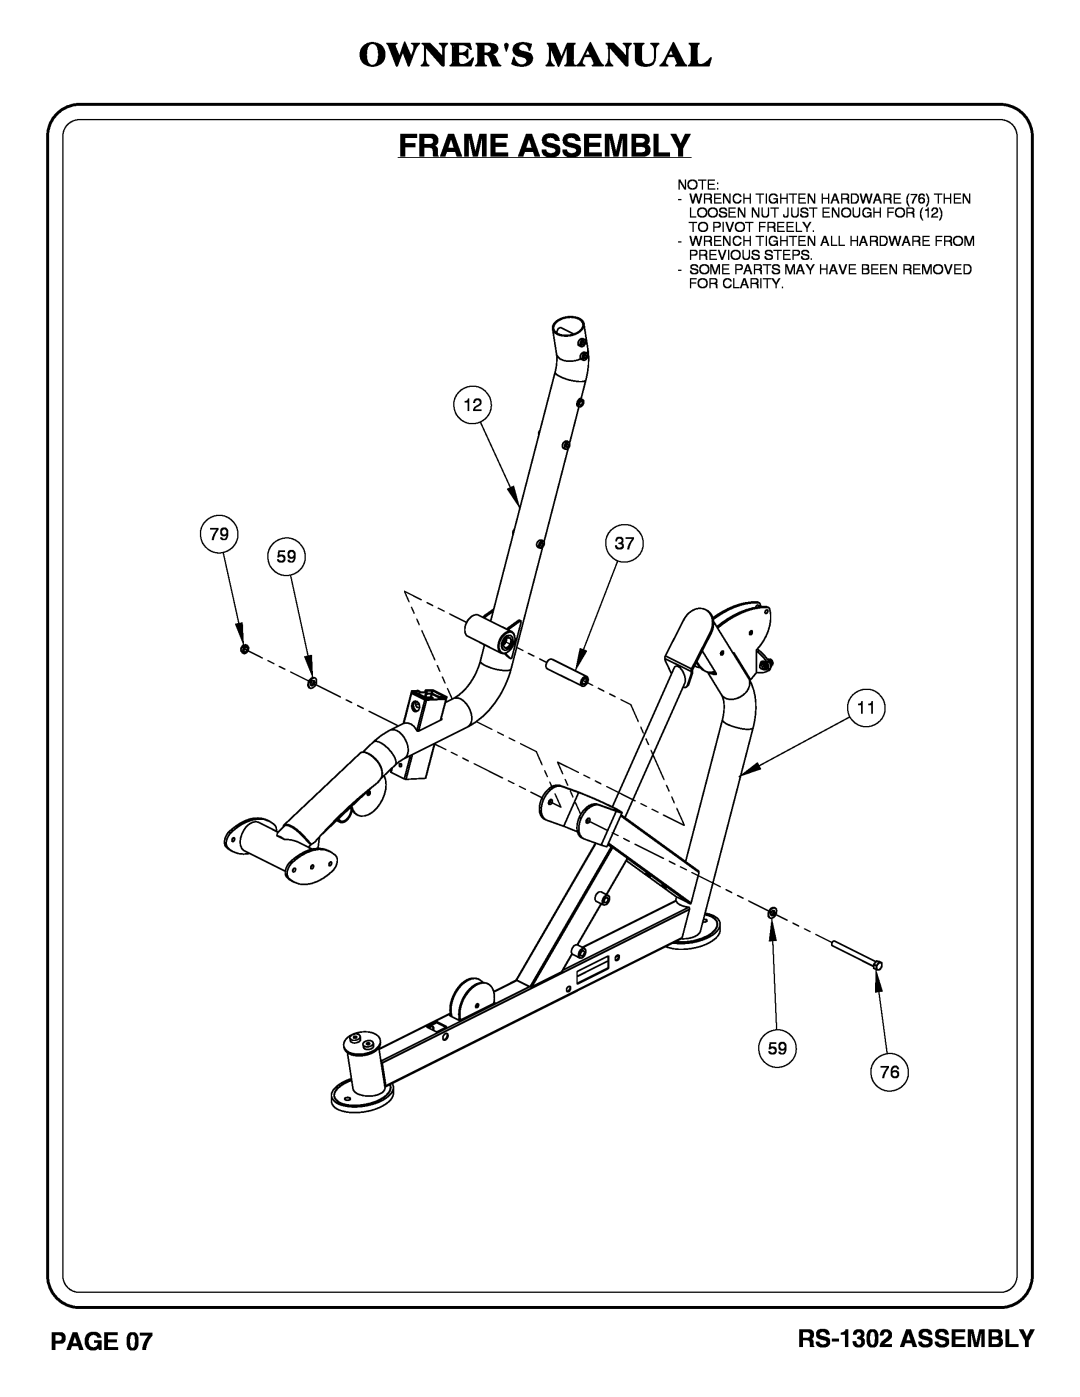 Hoist Fitness owner manual Owners Manual Frame Assembly, RS-1302 ASSEMBLY, Some Parts May Have Been Removed For Clarity 